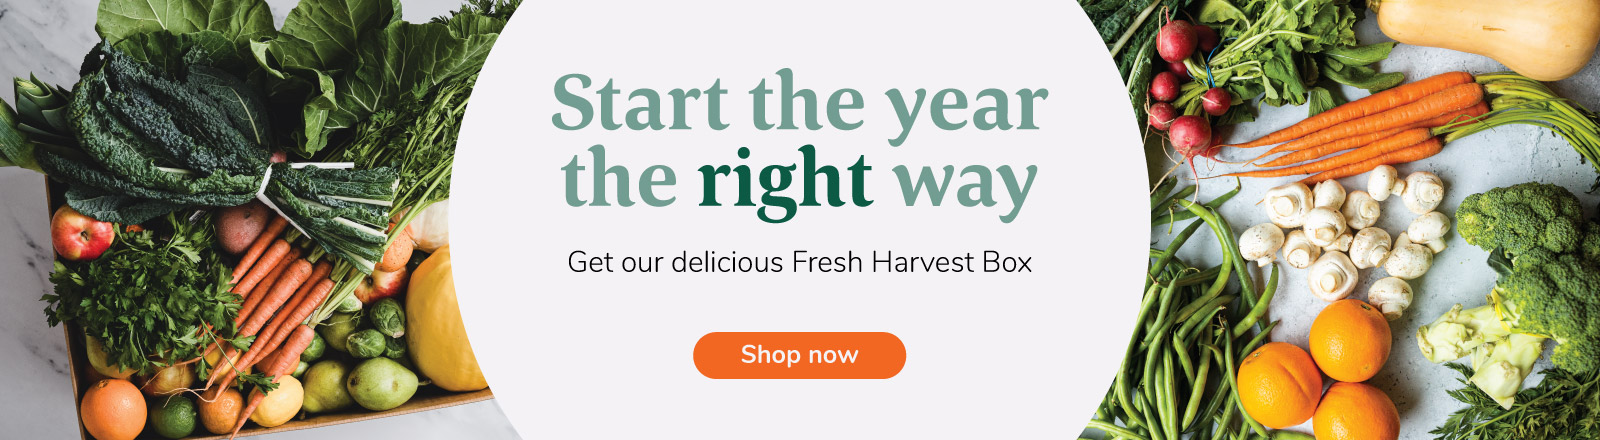 Start the year the right way. Get our delicious Fresh Harvest Box.